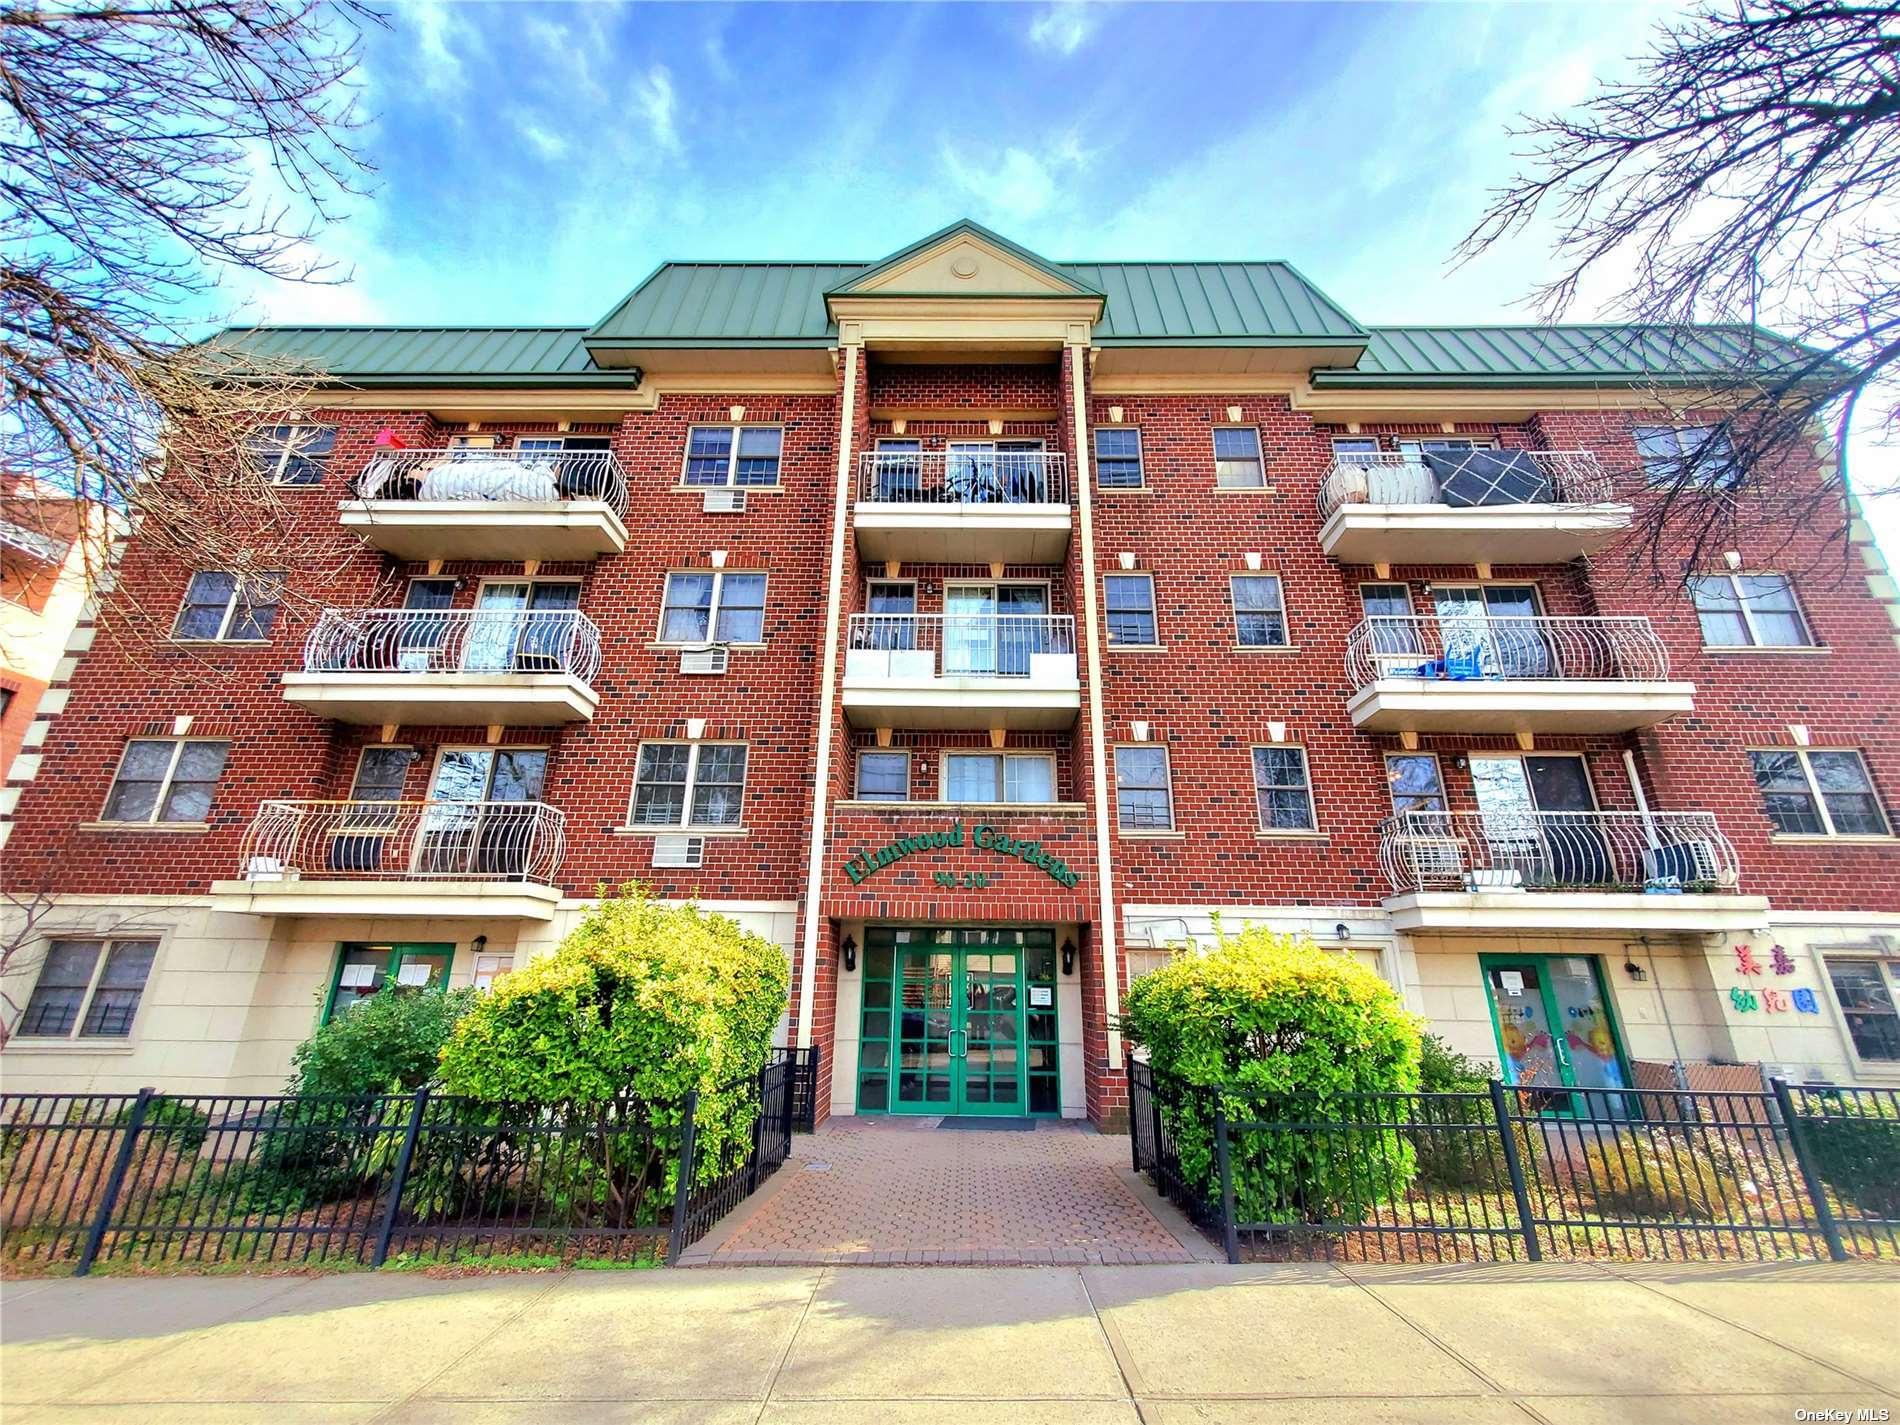 90-20 55 Avenue #2A in Queens, Elmhurst, NY 11373